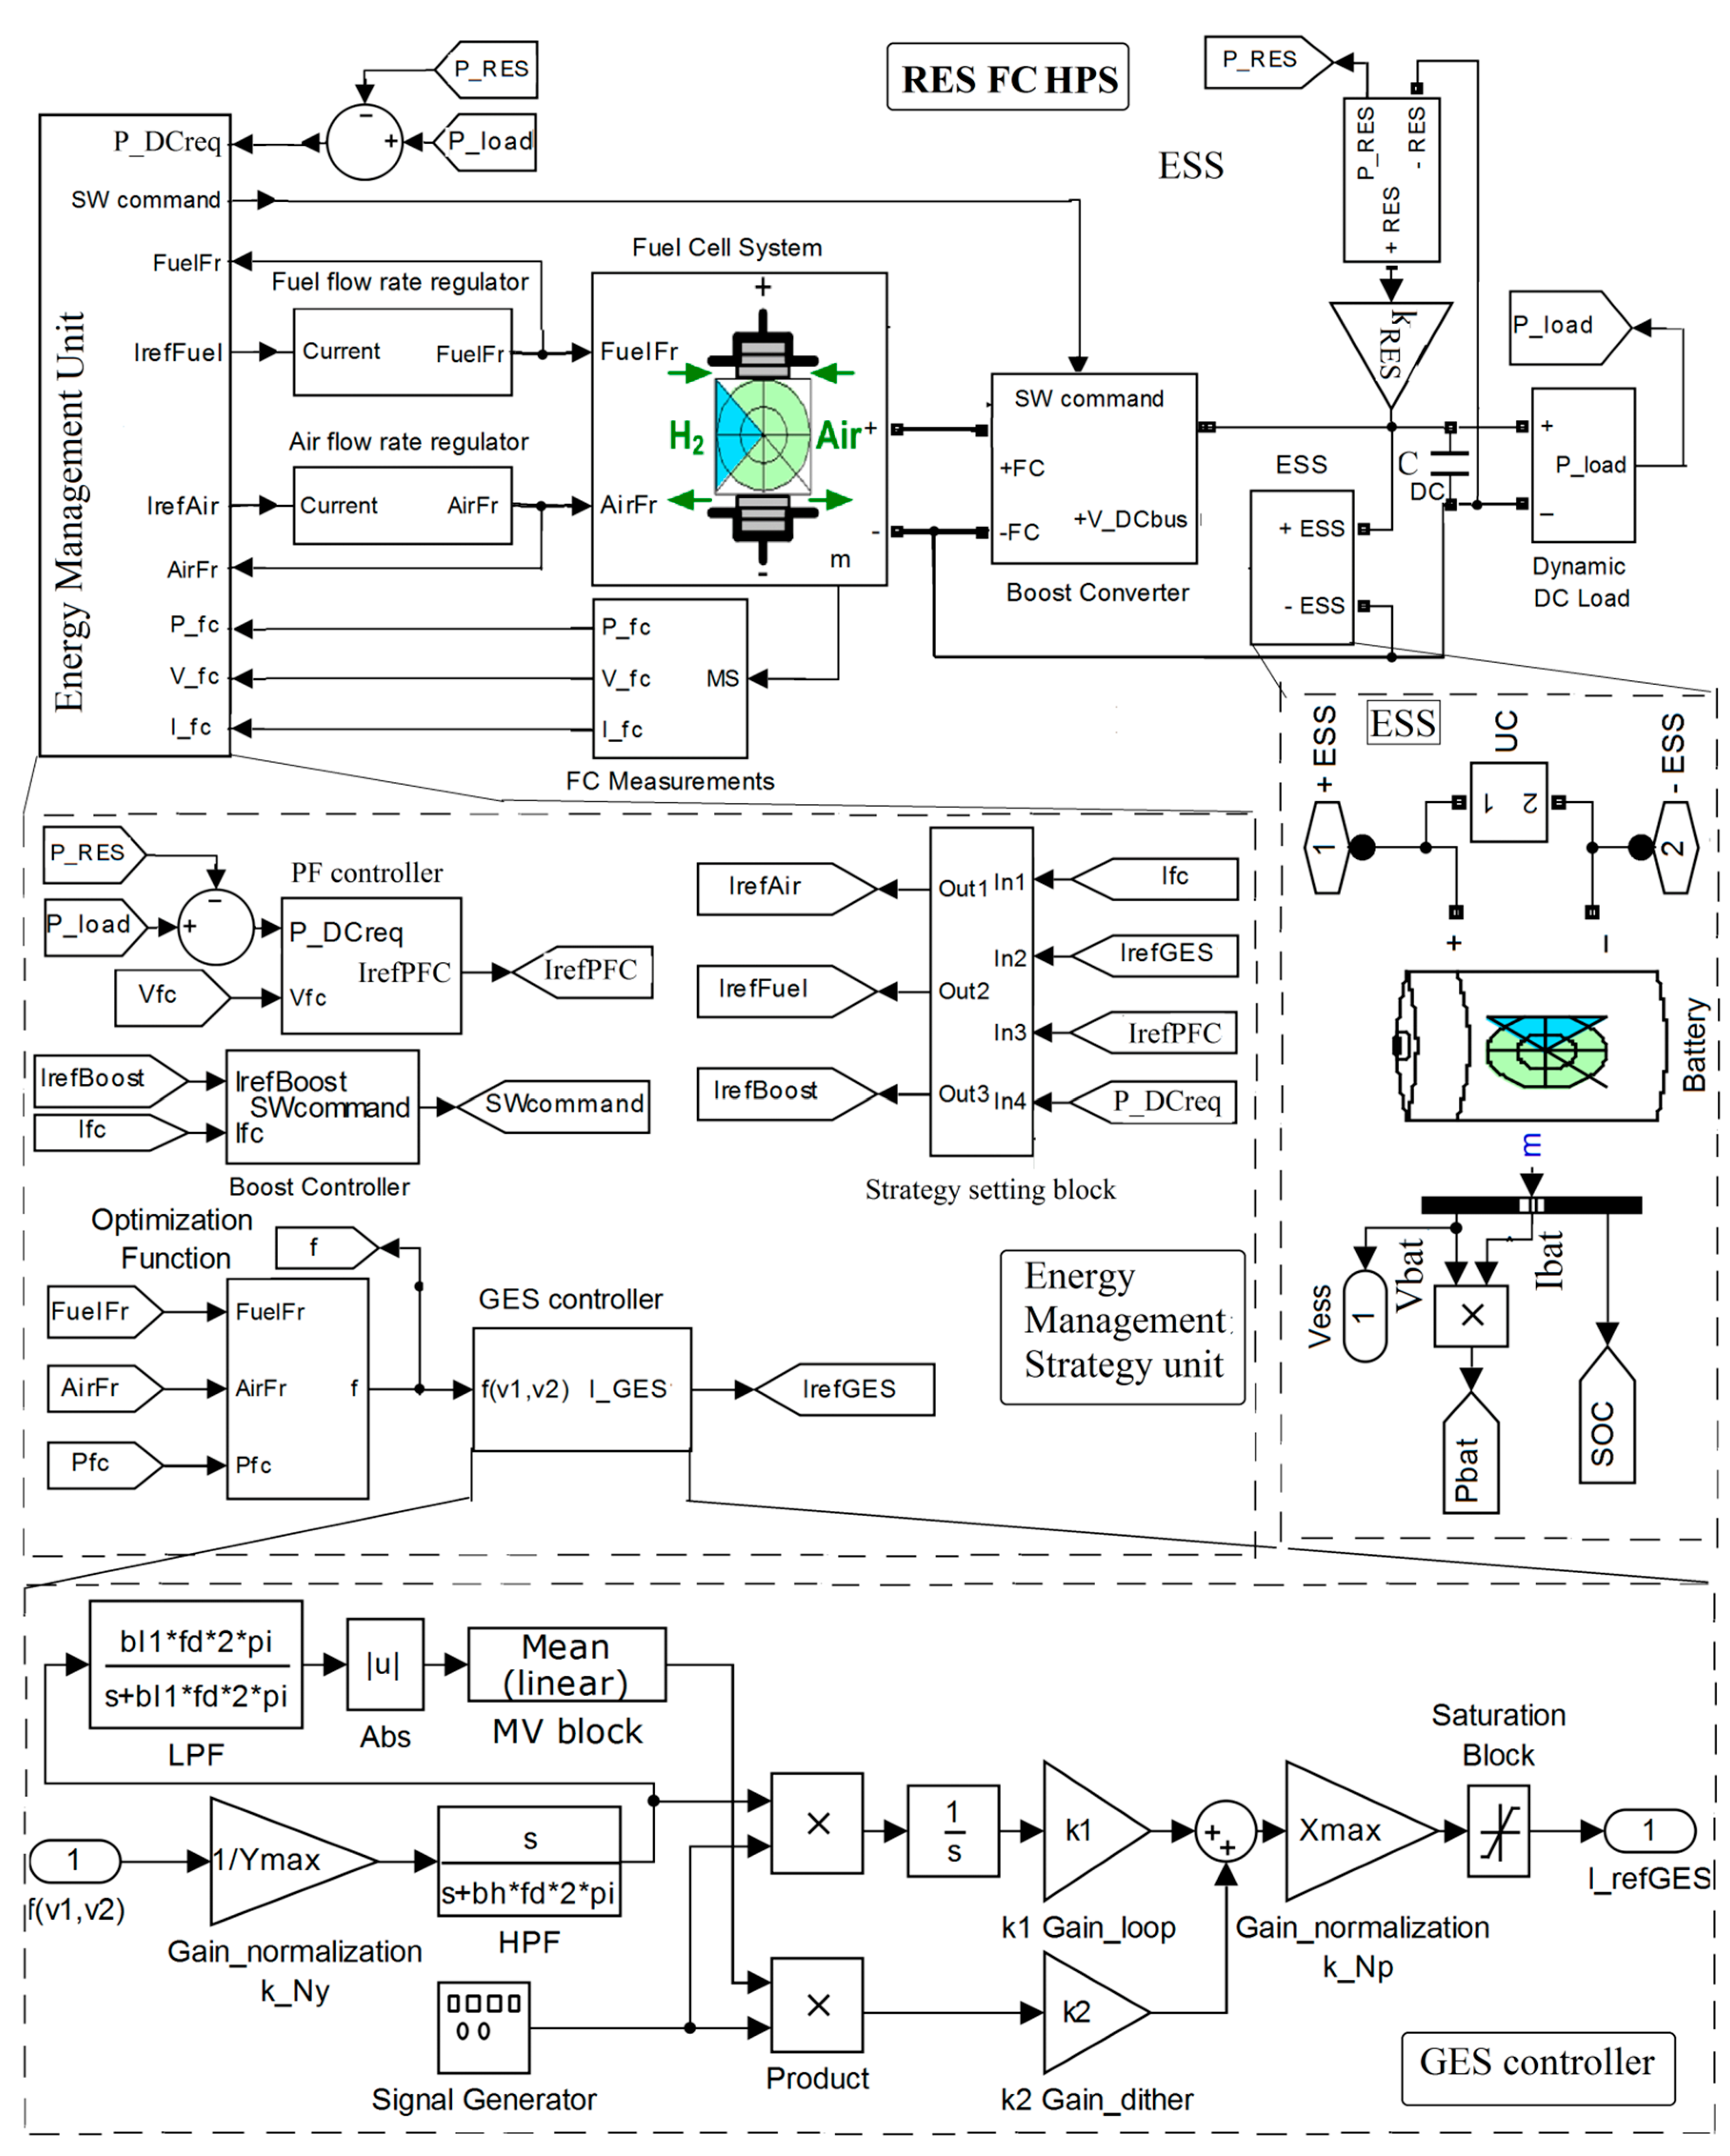 Applied Sciences Free Full Text Improving The Fuel Economy And Battery Lifespan In Fuel Cell Renewable Hybrid Power Systems Using The Power Following Control Of The Fueling Regulators Html